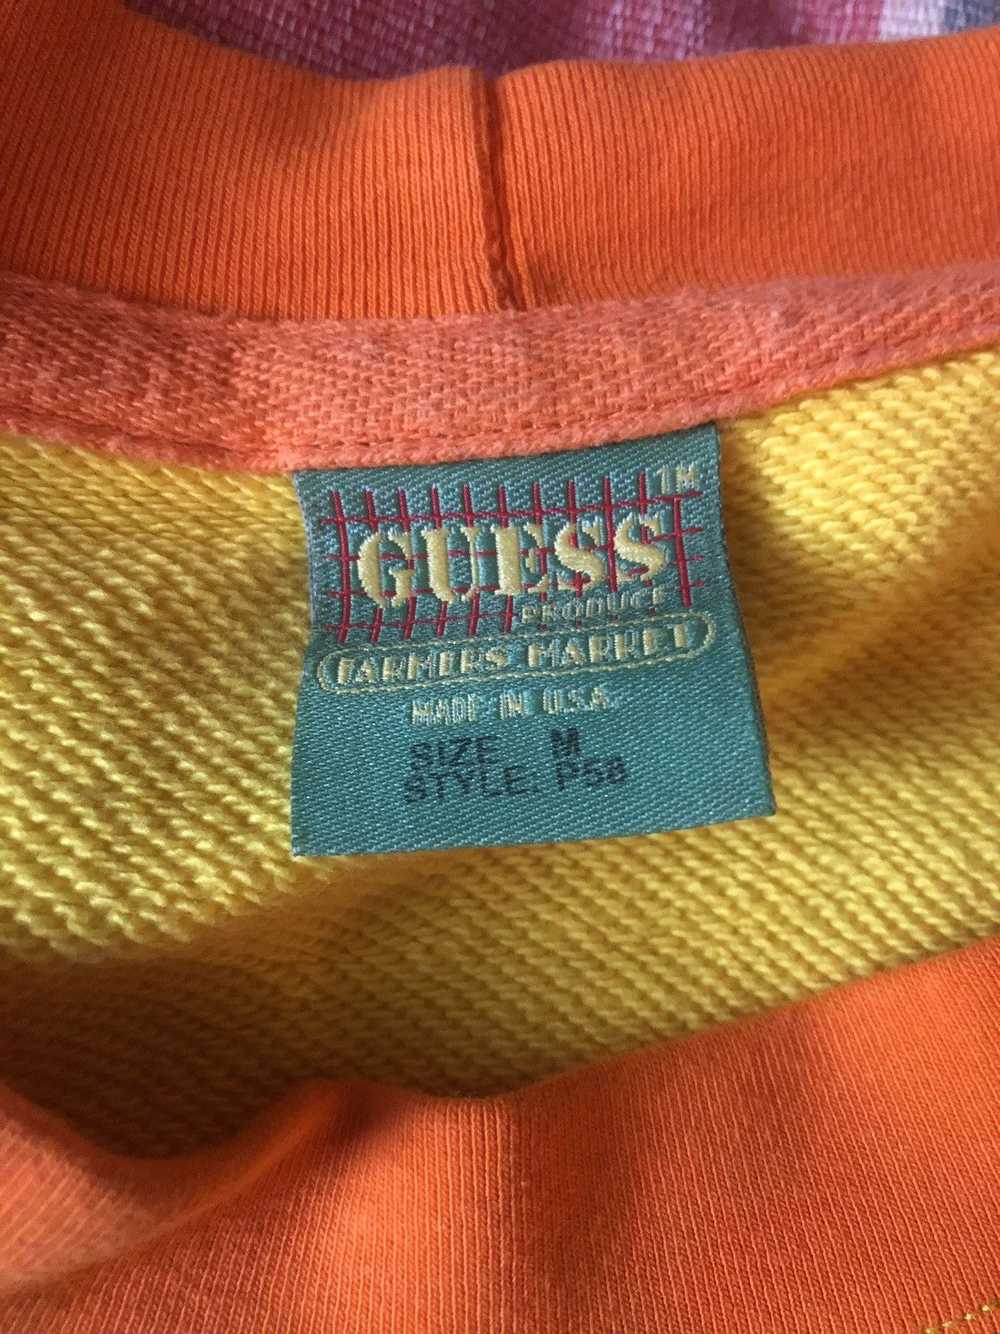 Farmers Market × Guess × Vintage $120 Sean Wother… - image 3